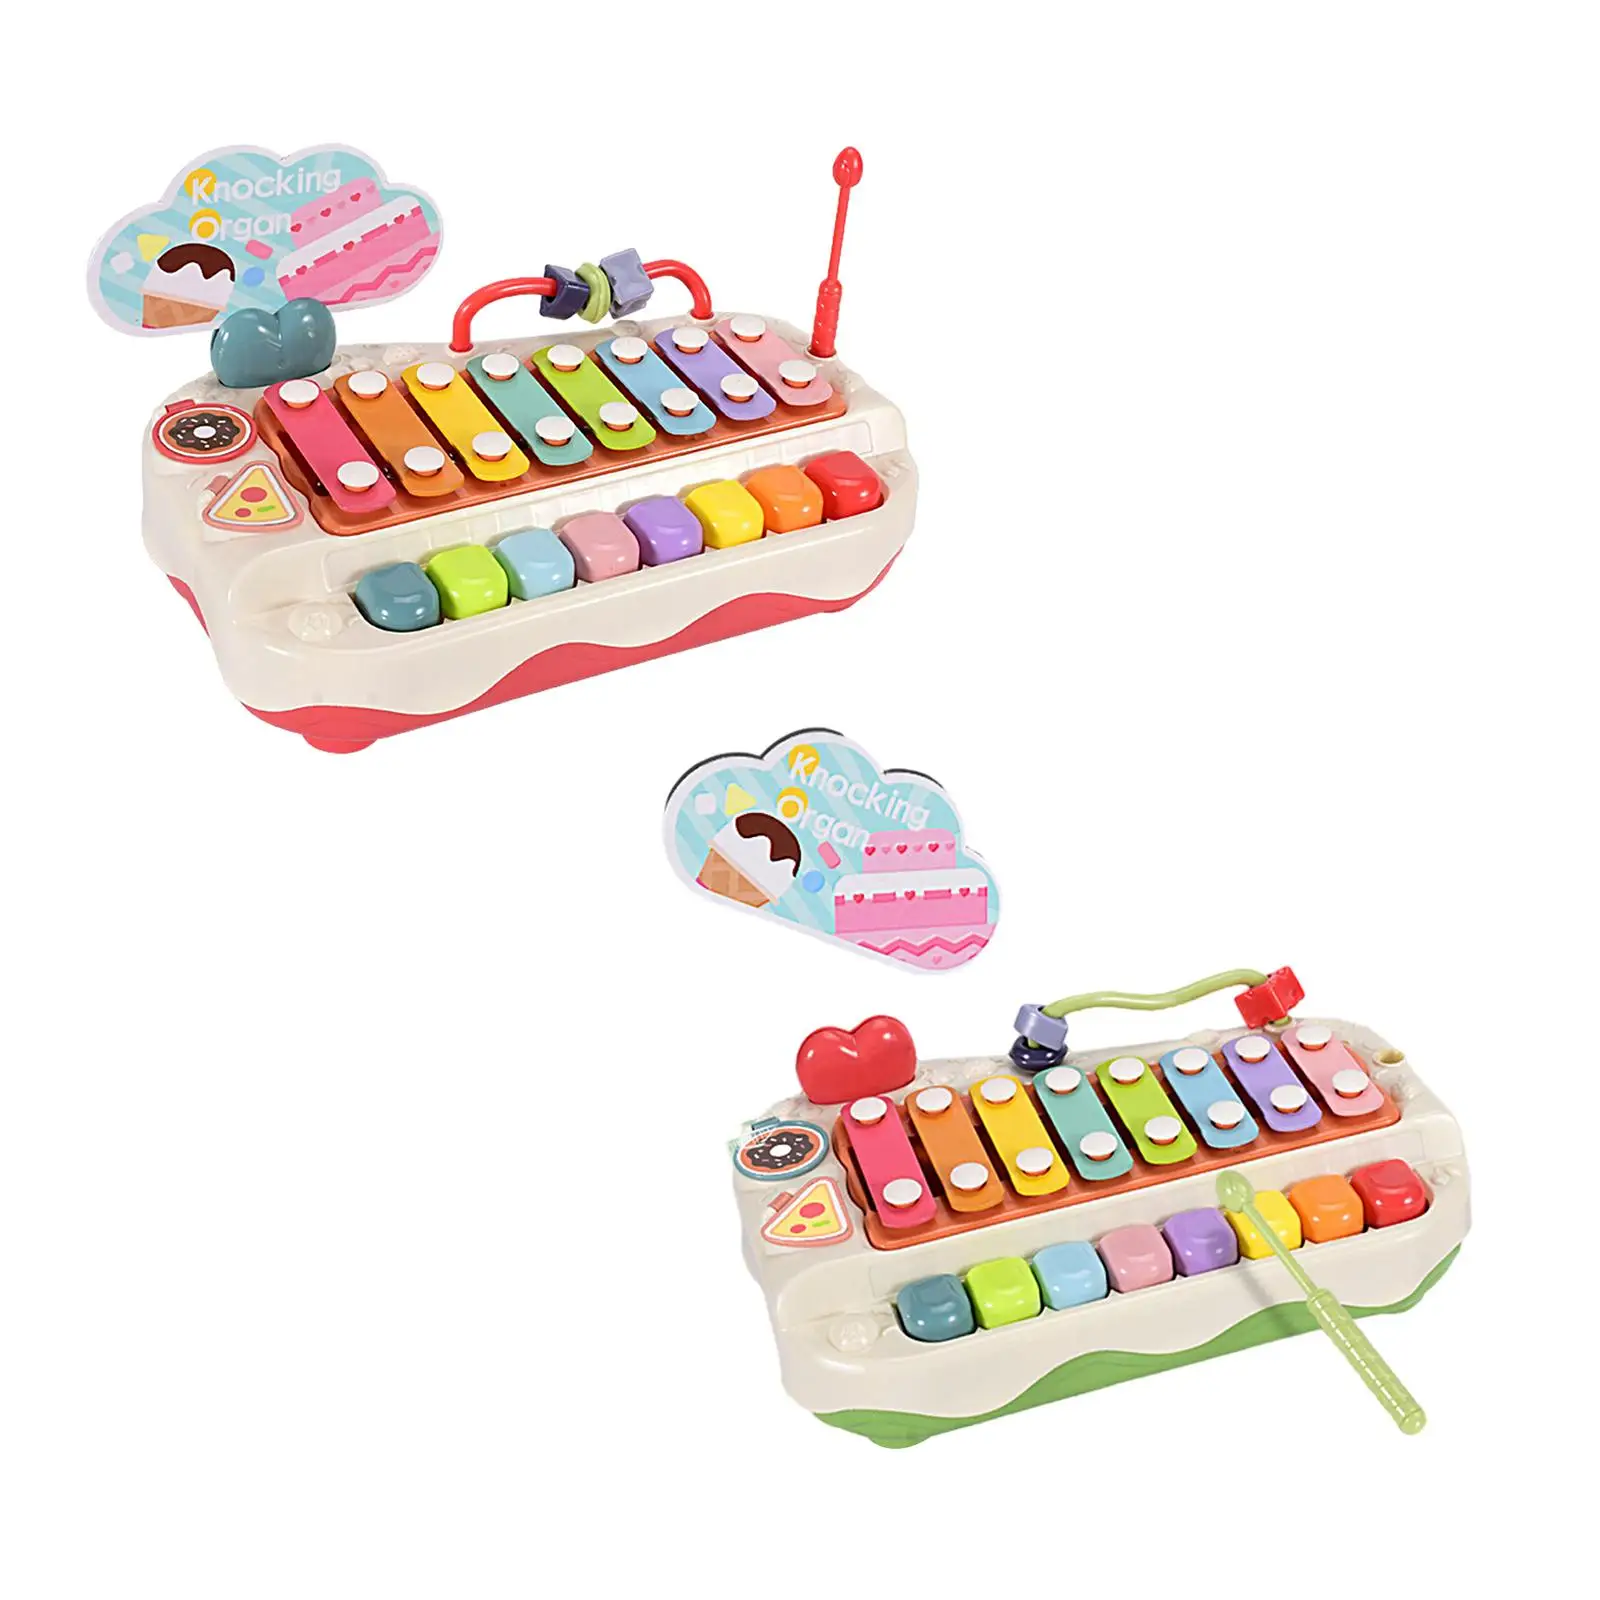 Baby Musical Toy Preschool Montessori Educational Motor Skills Eight Tone Baby Piano Xylophone Toy for Kids 3+ Holiday Gifts